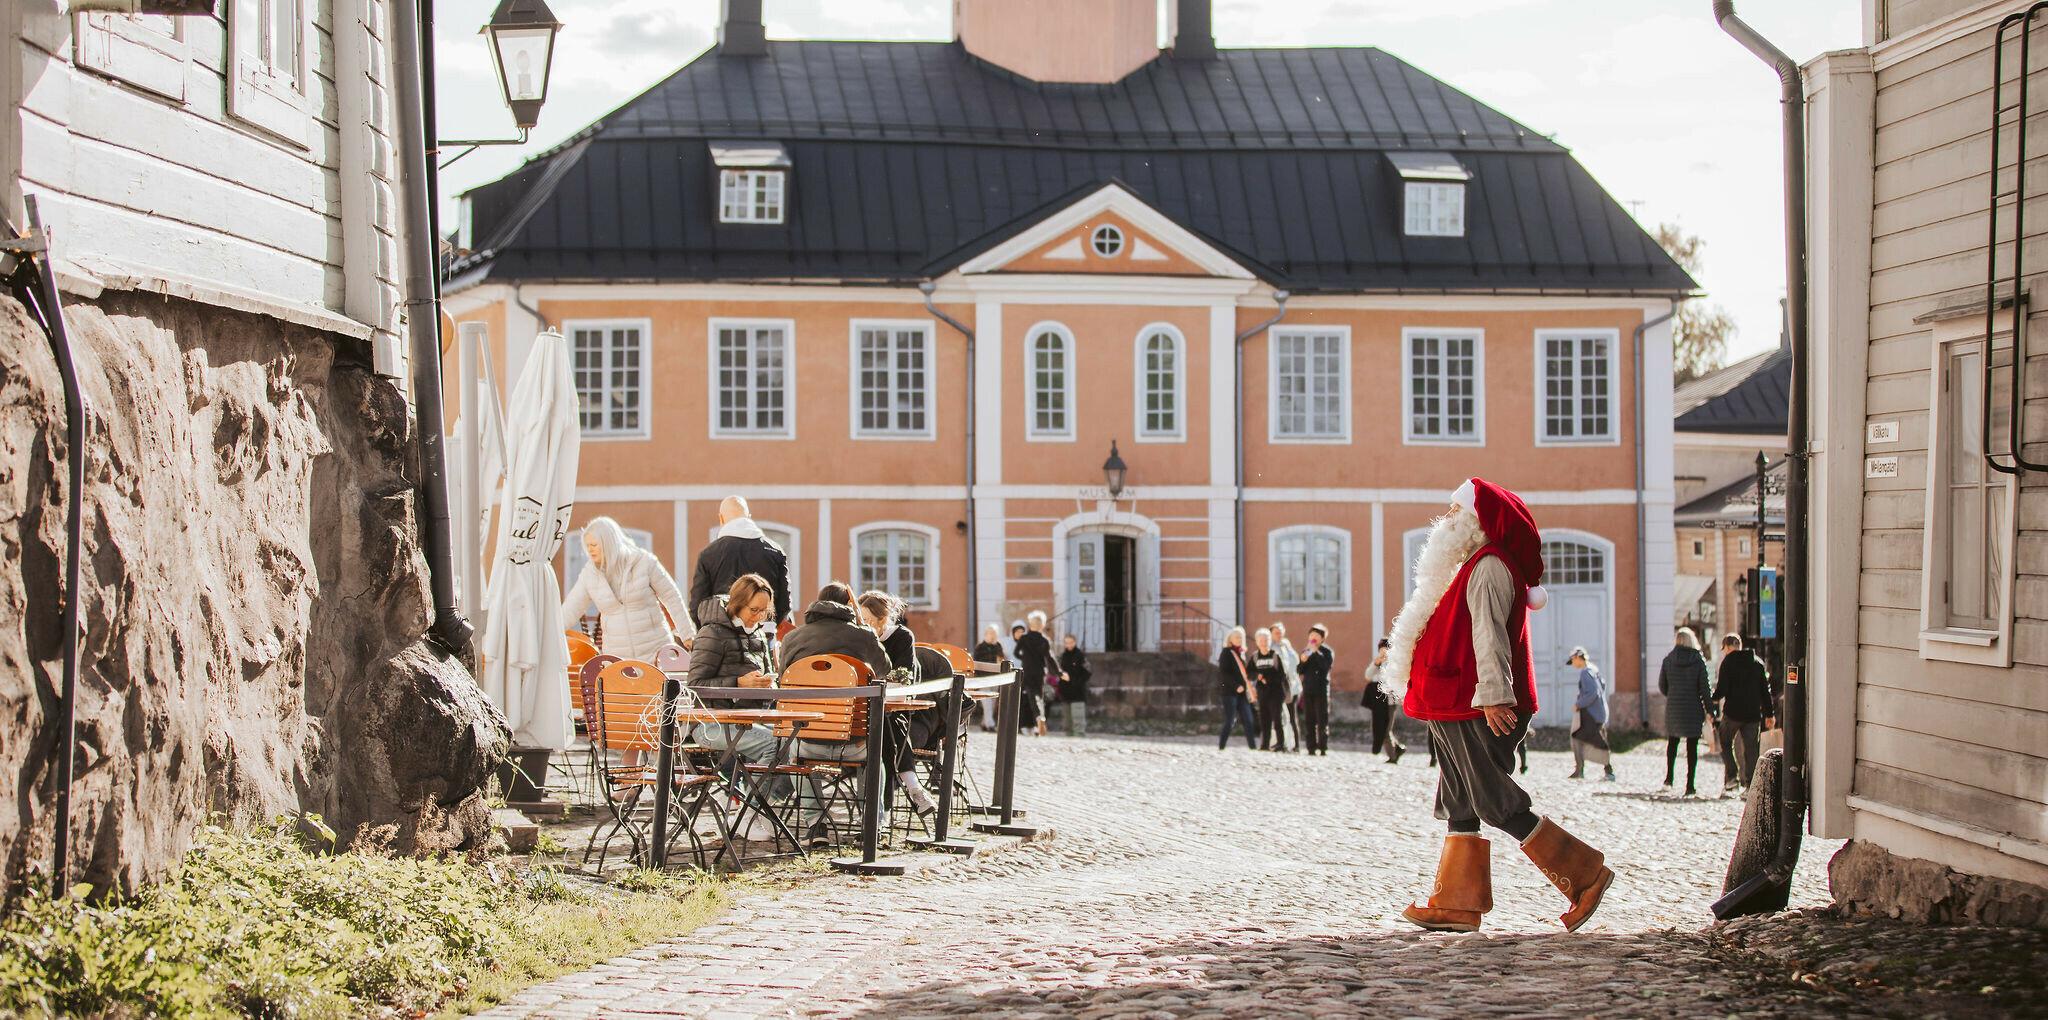 Santa by the Market Square in Old Porvoo